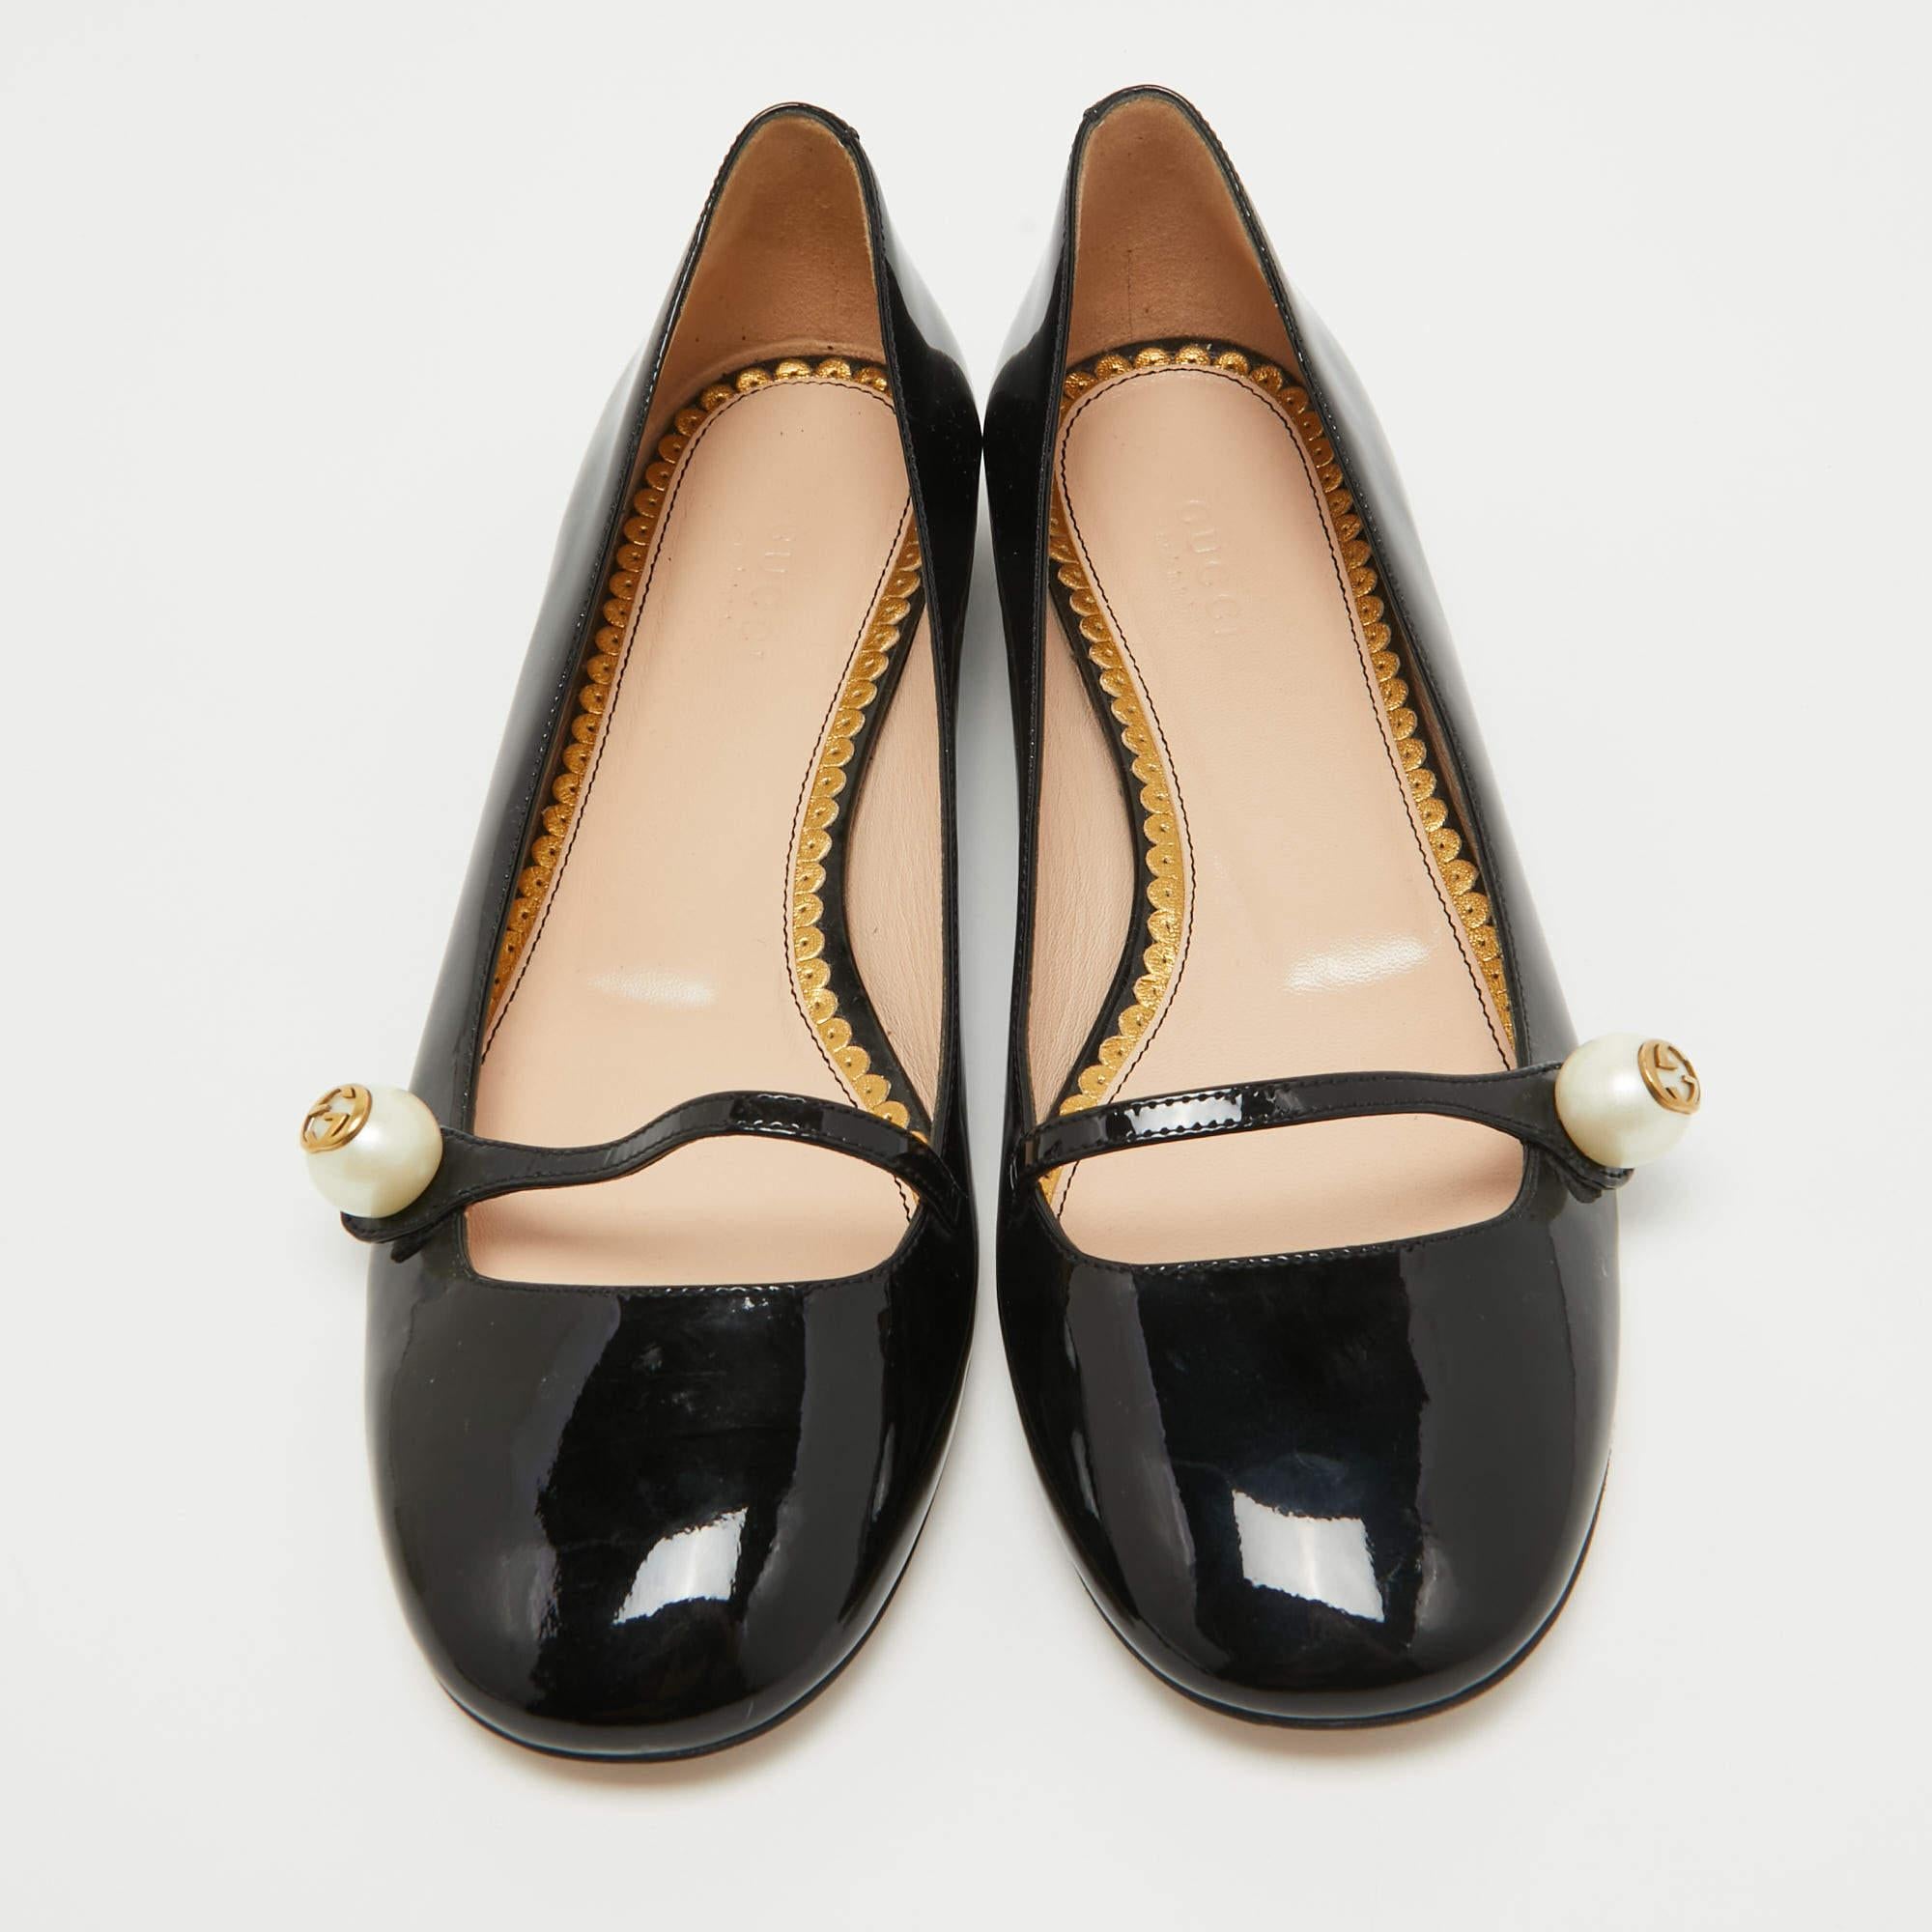 Gucci Black Patent Leather GG Pearl Embellished Ballet Flats Size 37.5 1